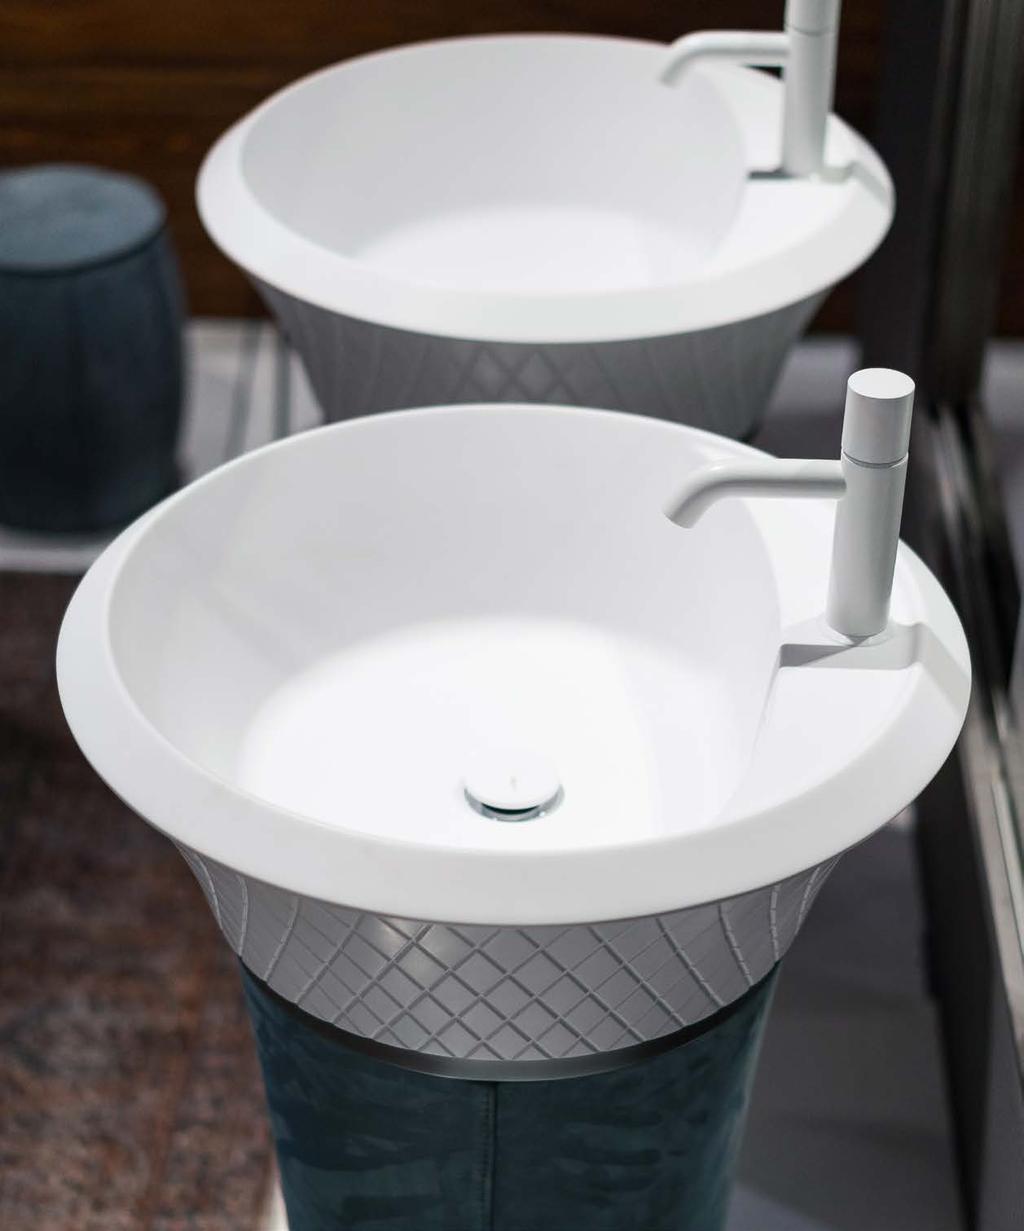 Washbasins from the Ceramilux matt lacquer collection, coated in Baxter Kashmir Sucre leather and